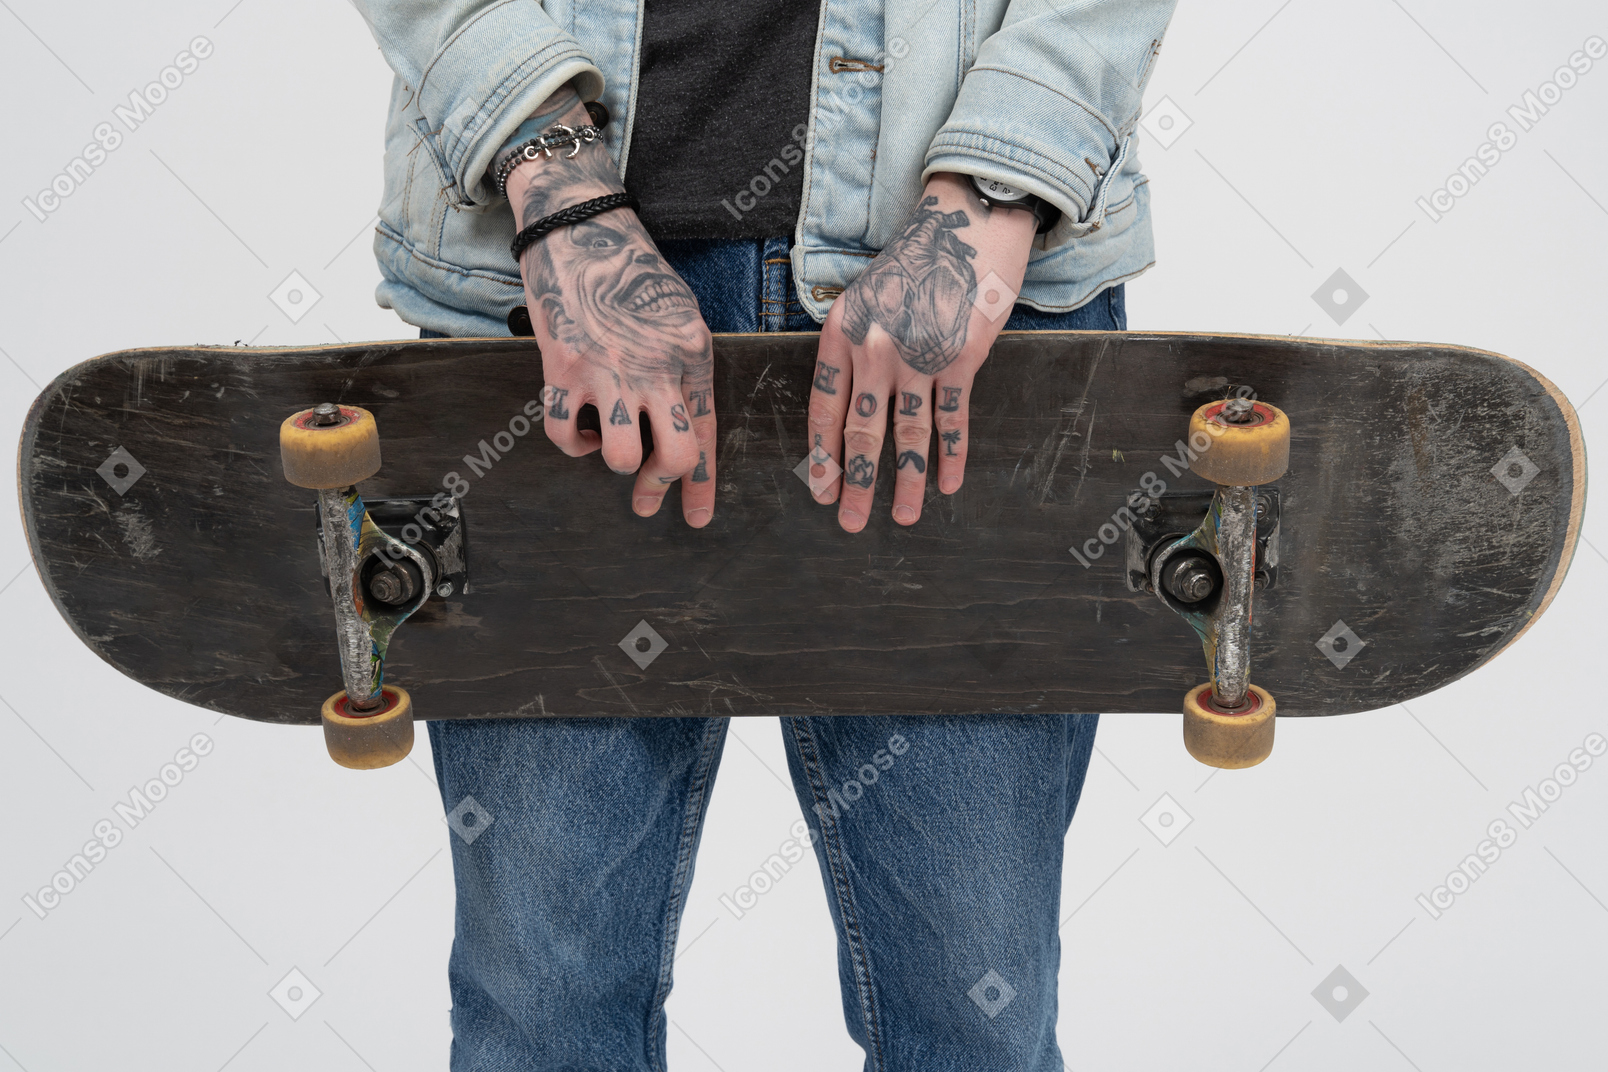 Holding a skateboard with both tattooed hands